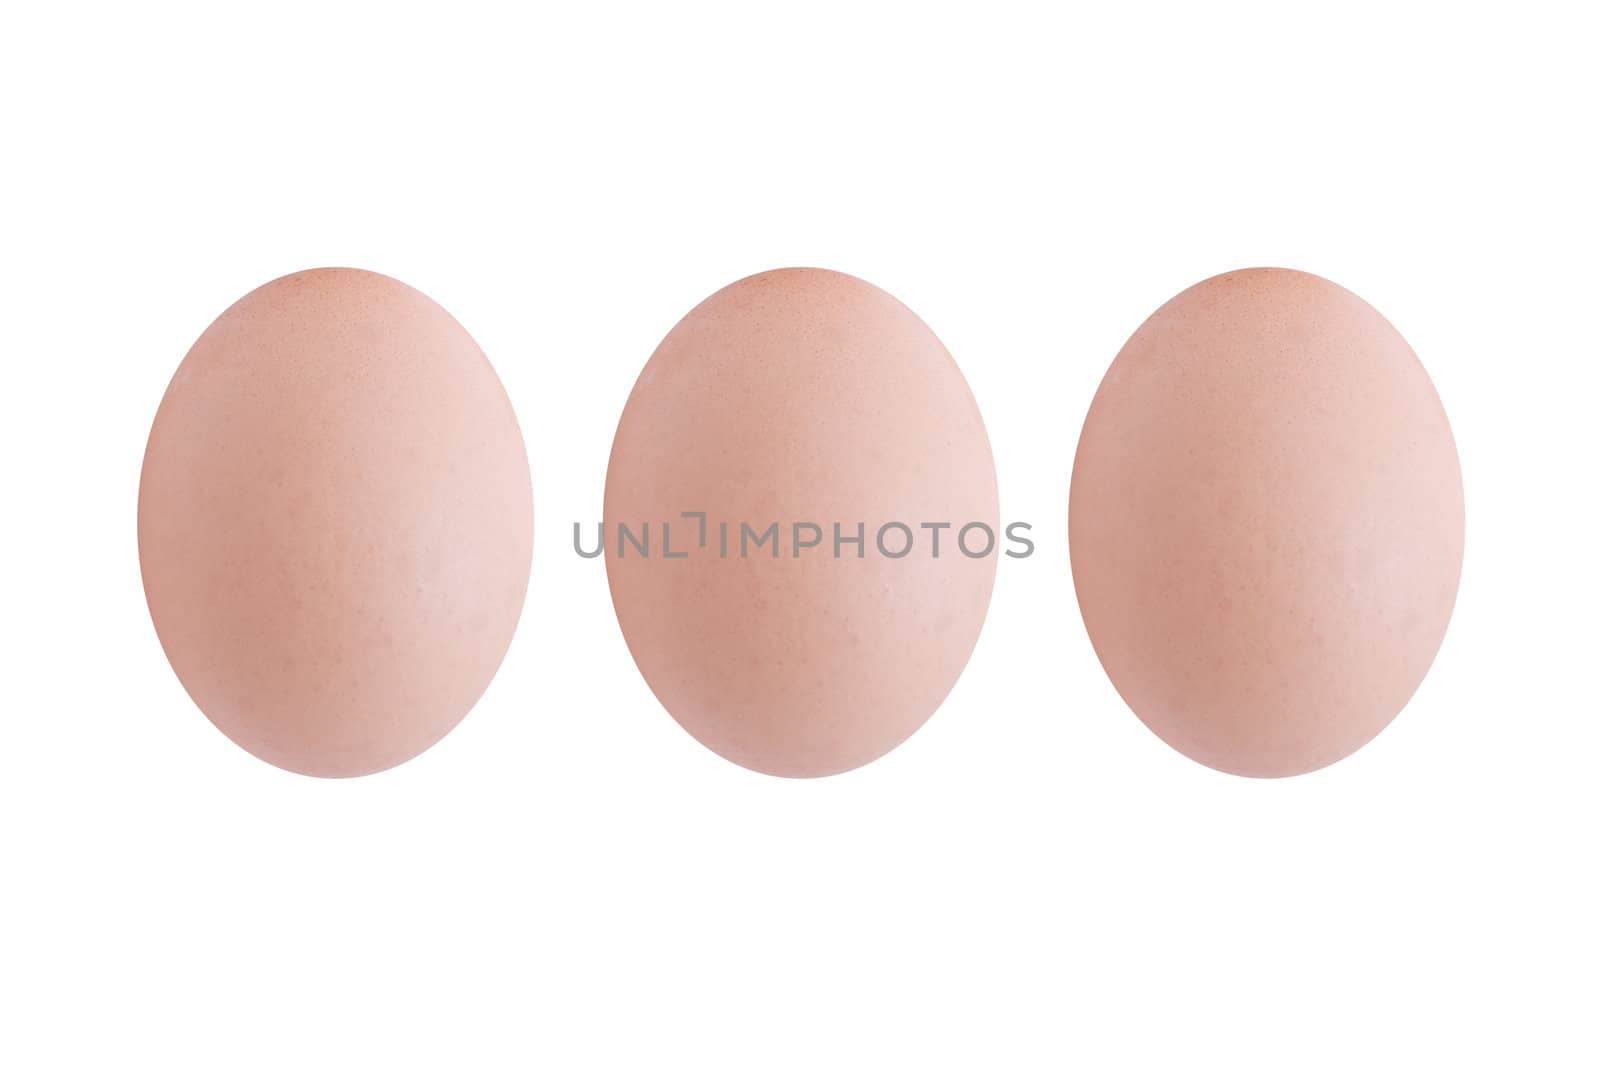 Three brown eggs, upright and lined up in a row, extracted and isolated against a white background.